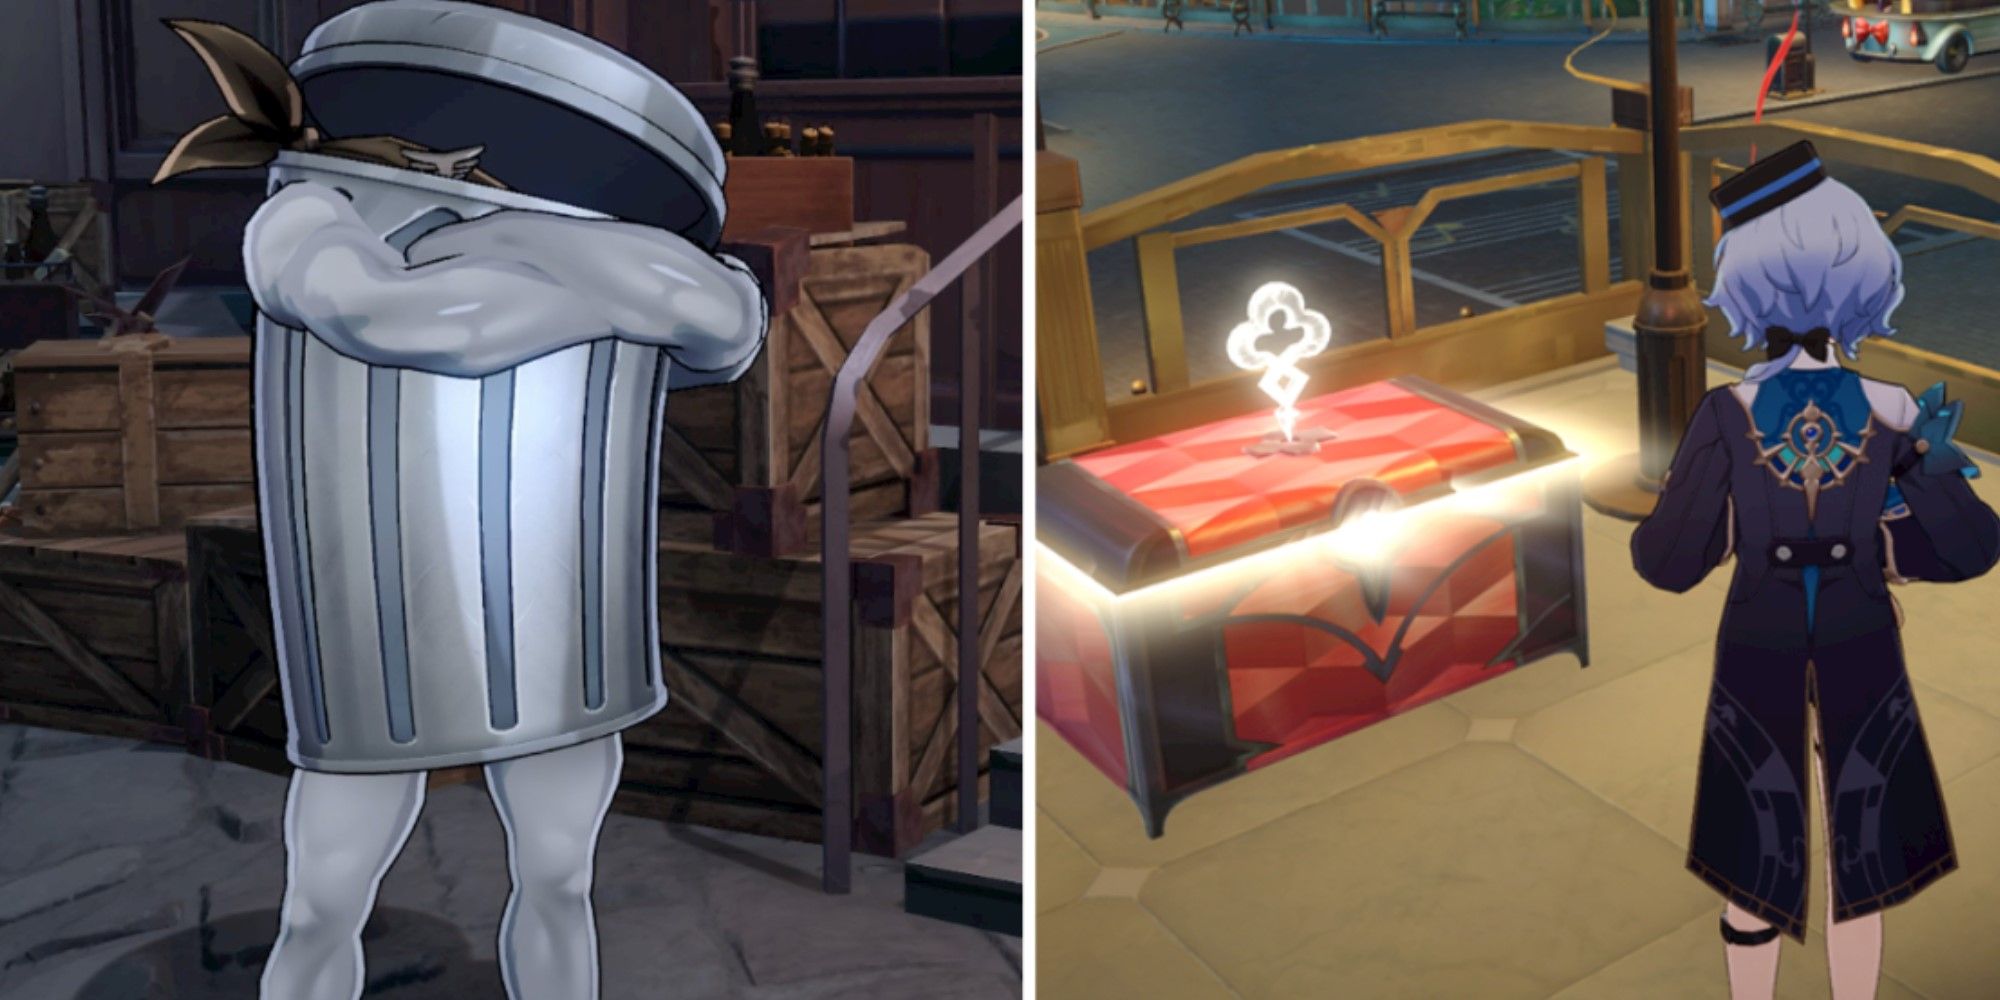 In the left panel, a trash can with legs crosses its arms. On the right, Honkai Star Rail's Misha looks at a treasure chest.